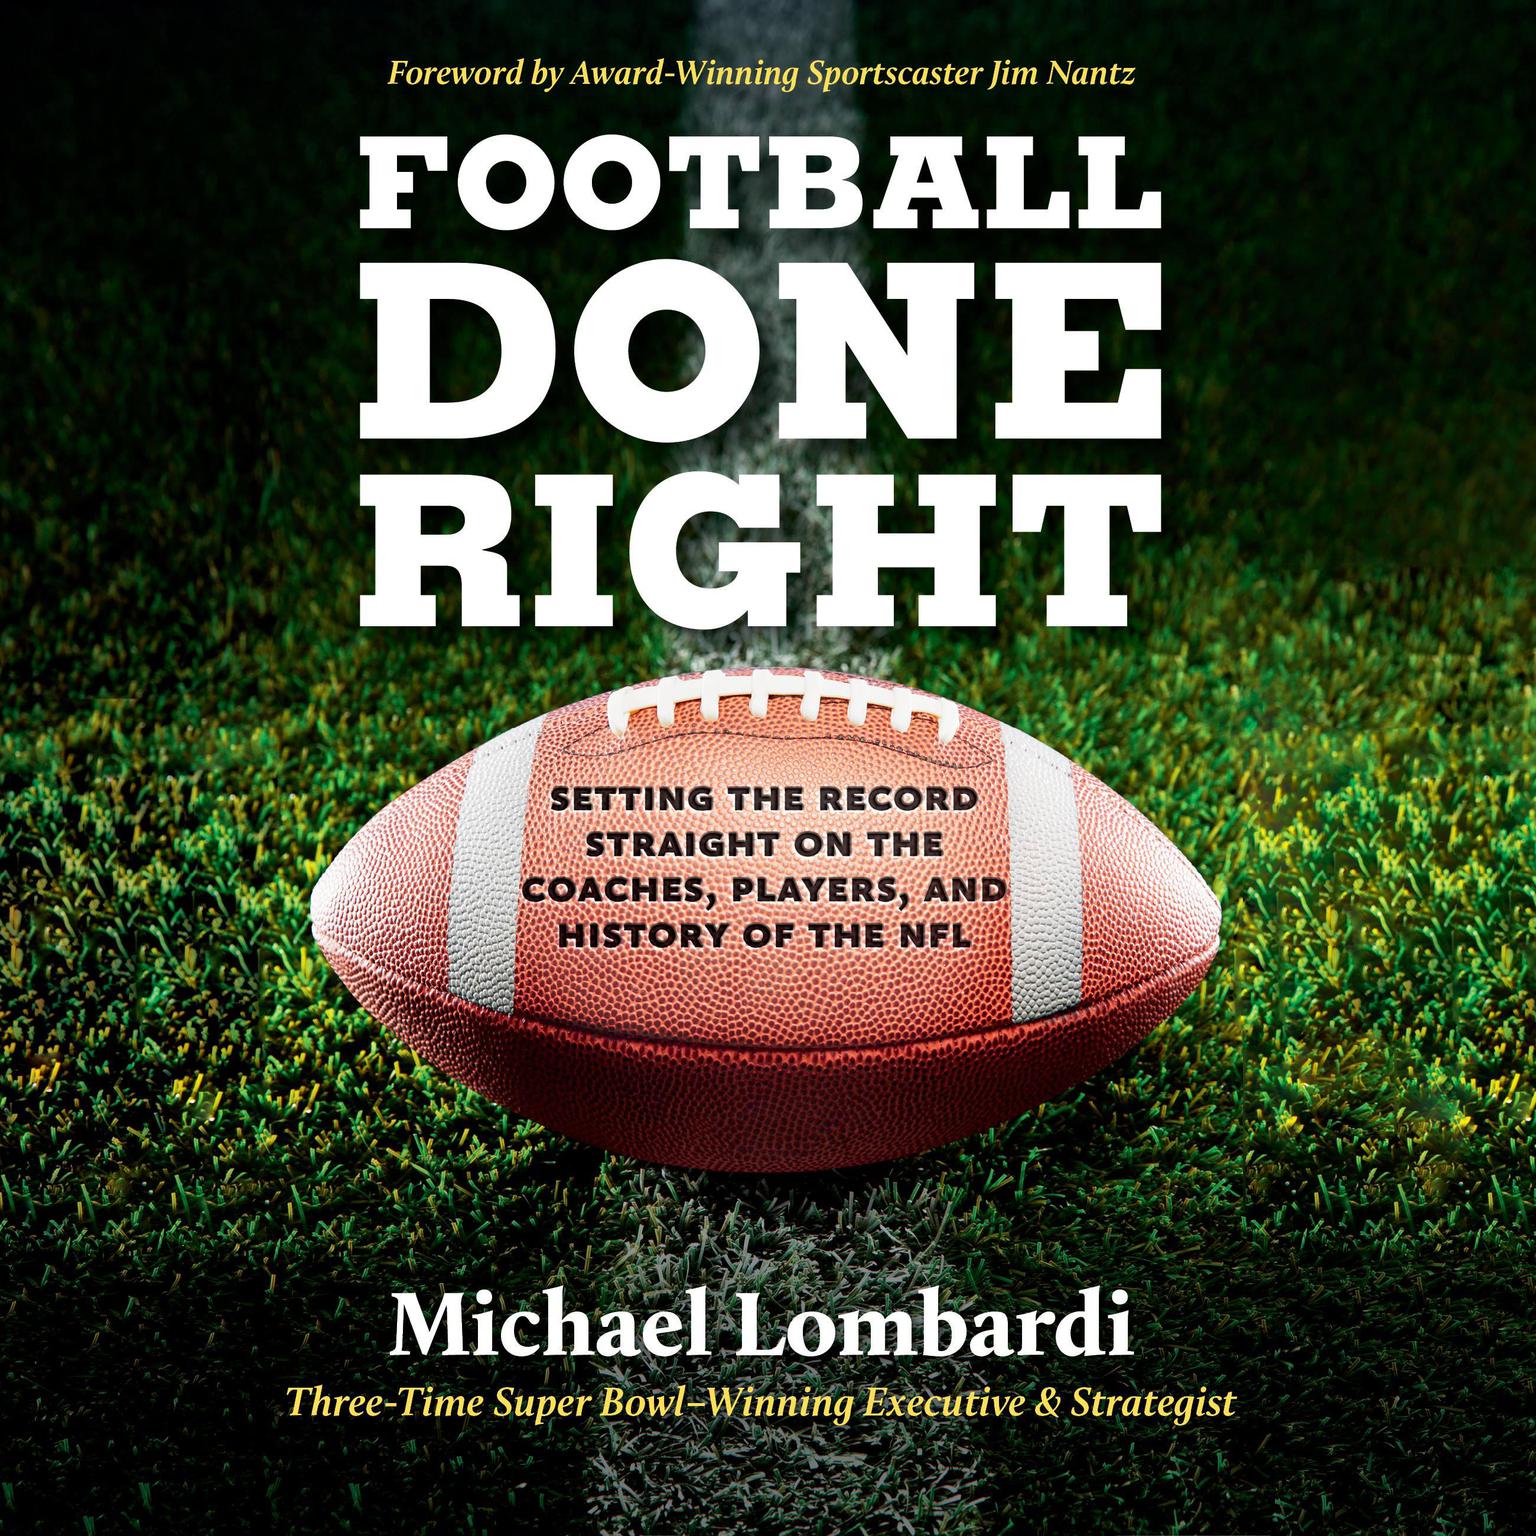 Football Done Right: Setting the Record Straight on the Coaches, Players, and History of the NFL Audiobook, by Michael Lombardi